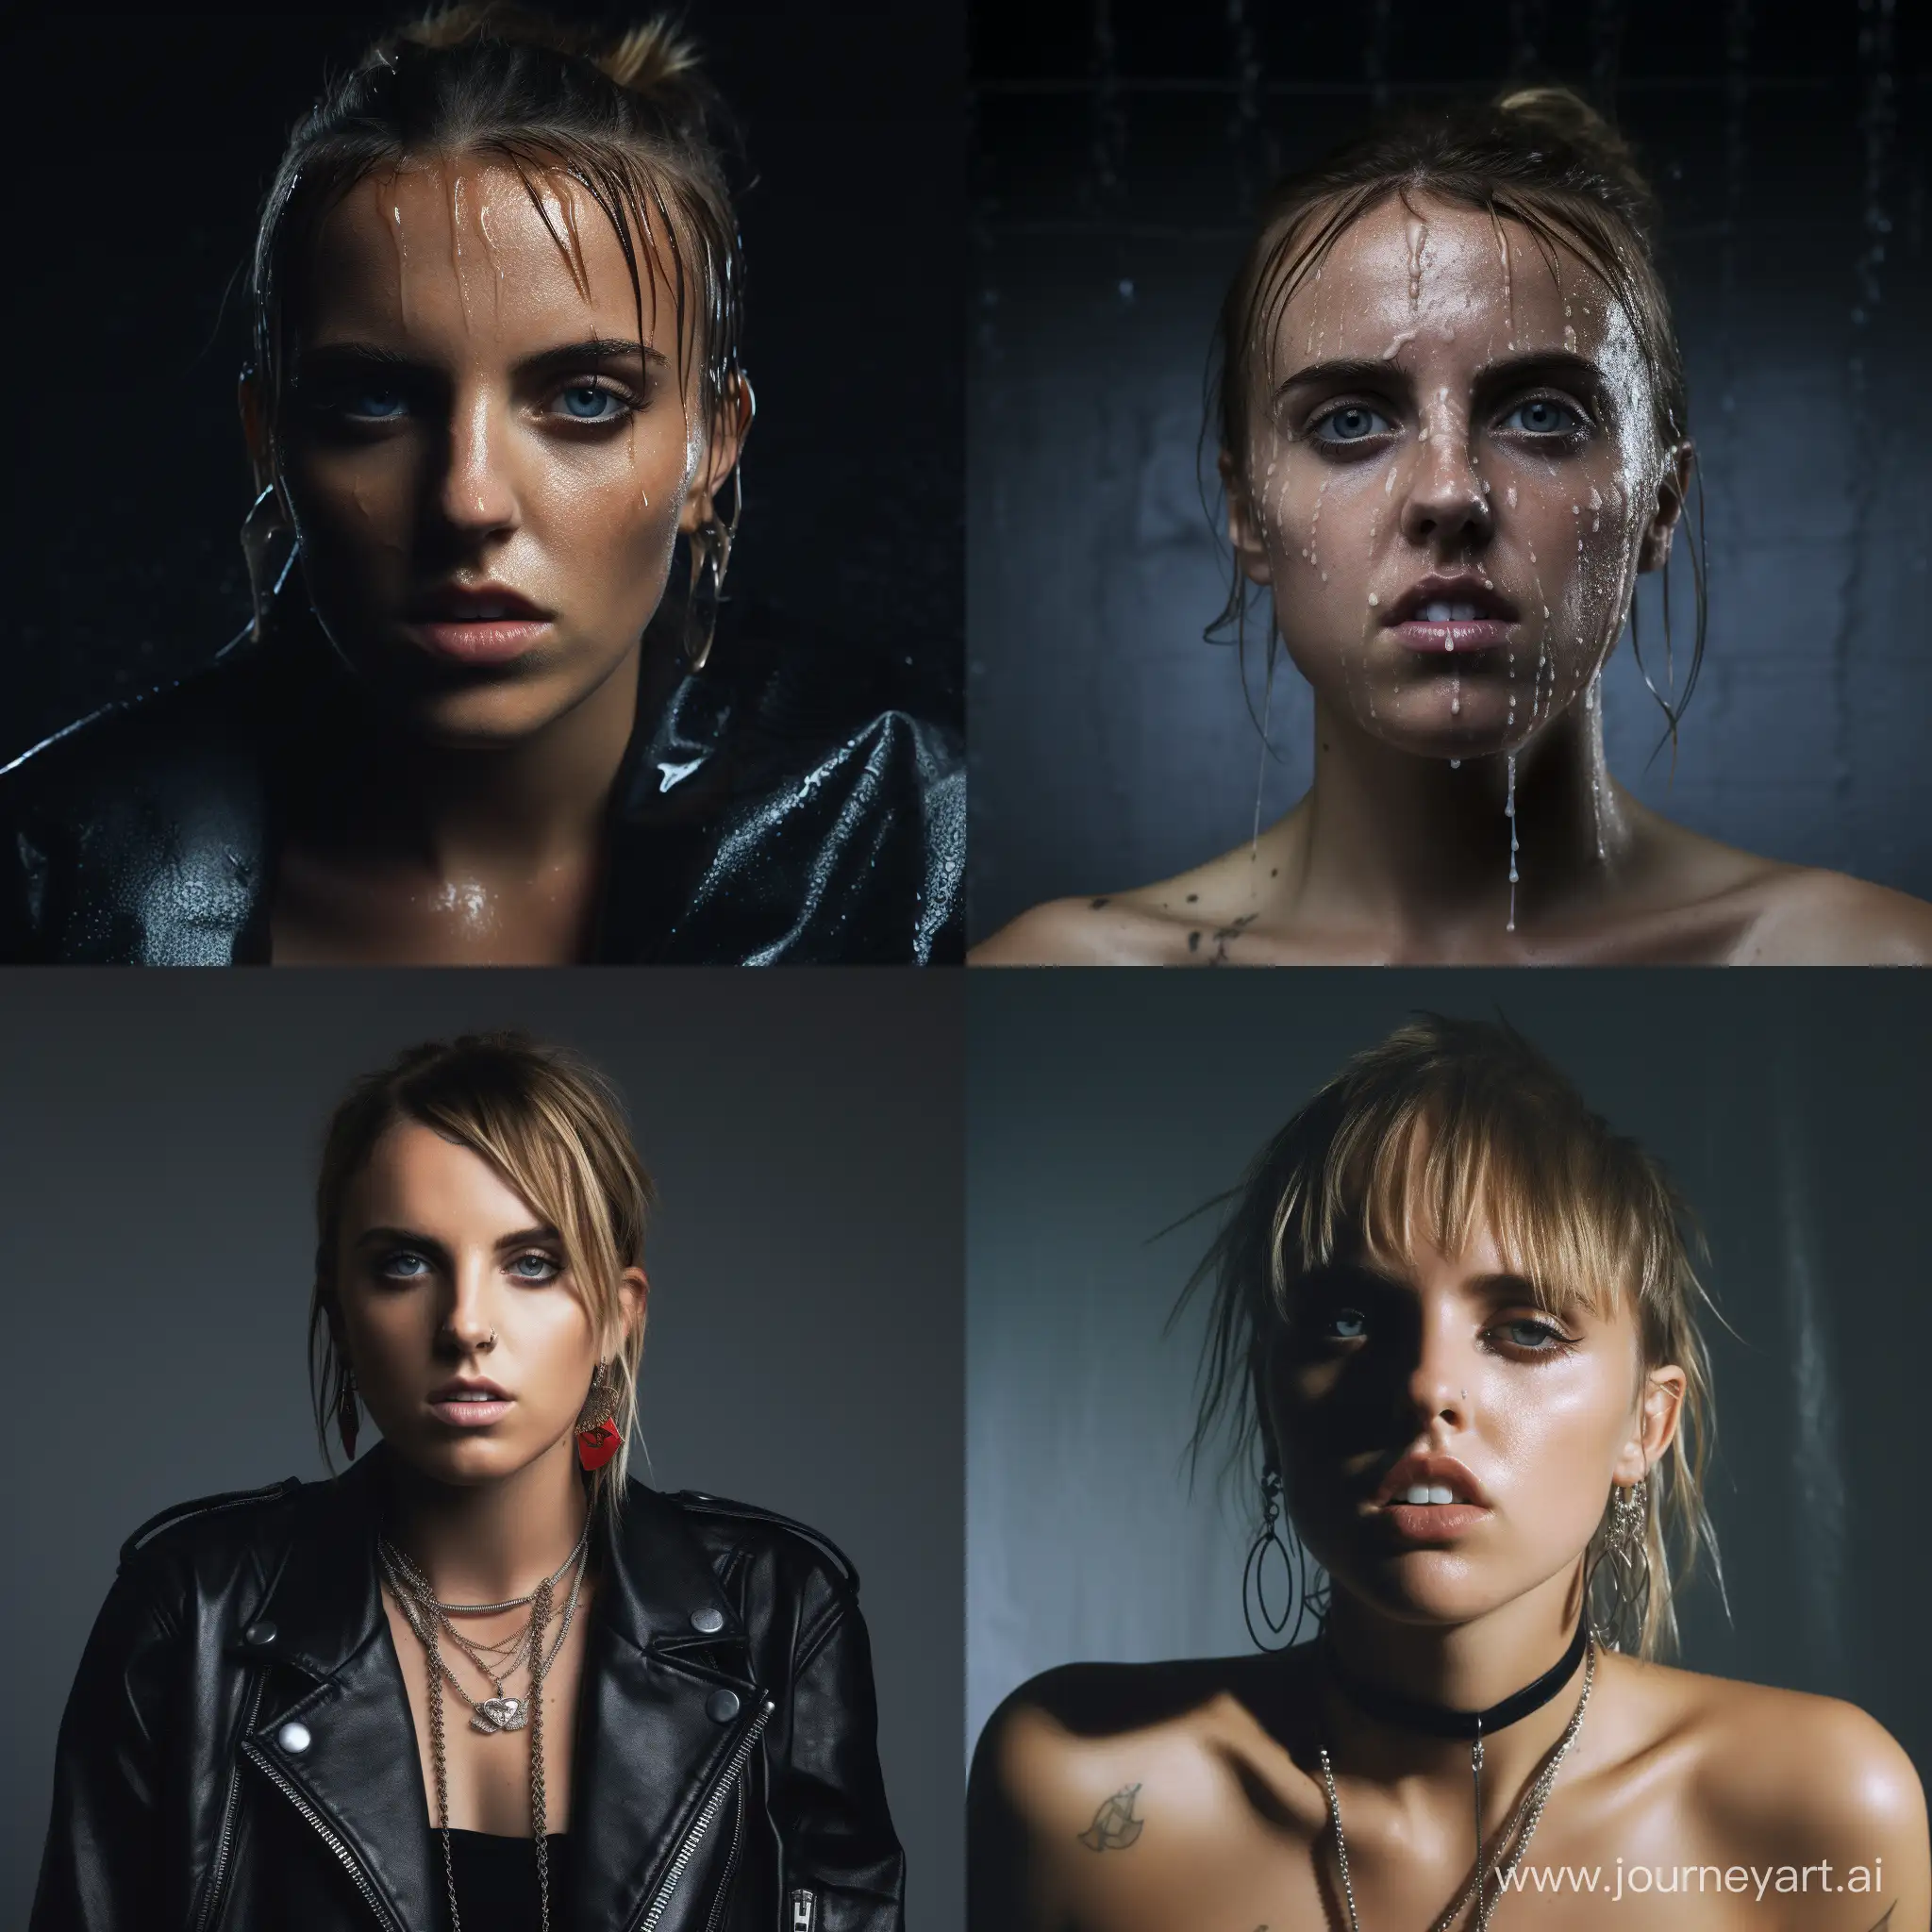 A photo of the singer MØ (momomoyouth)